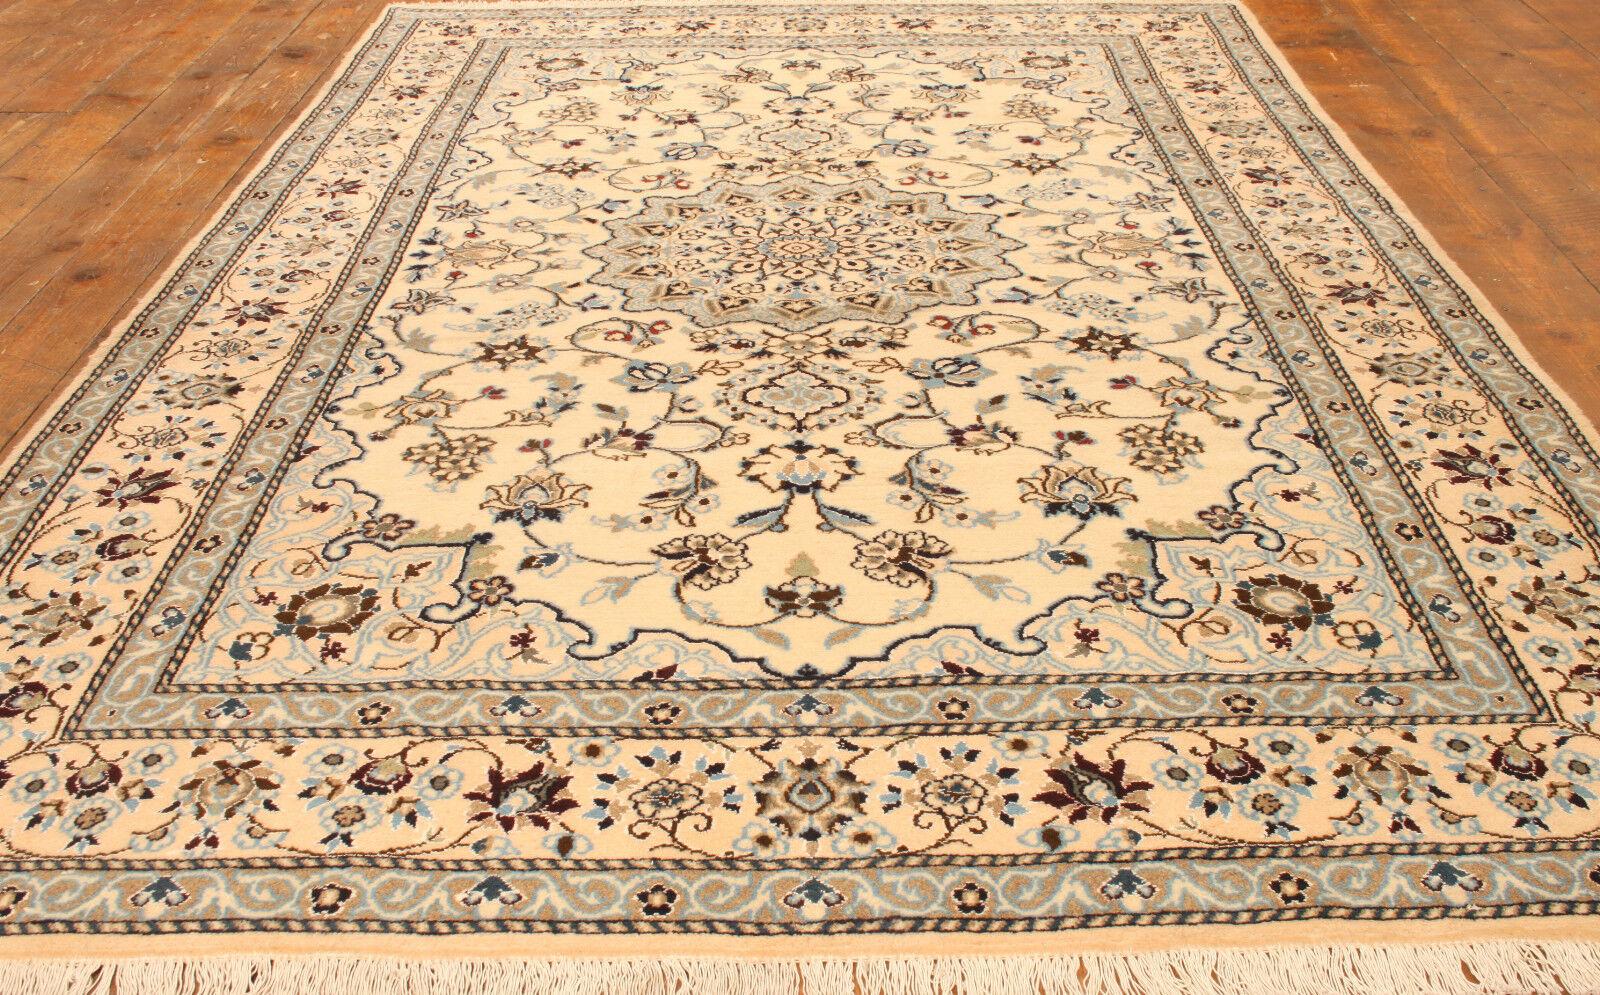 Late 20th Century Handmade Vintage Persian Style Nain Rug With Silk 6.1' x 9.6', 1970s - 1T37 For Sale